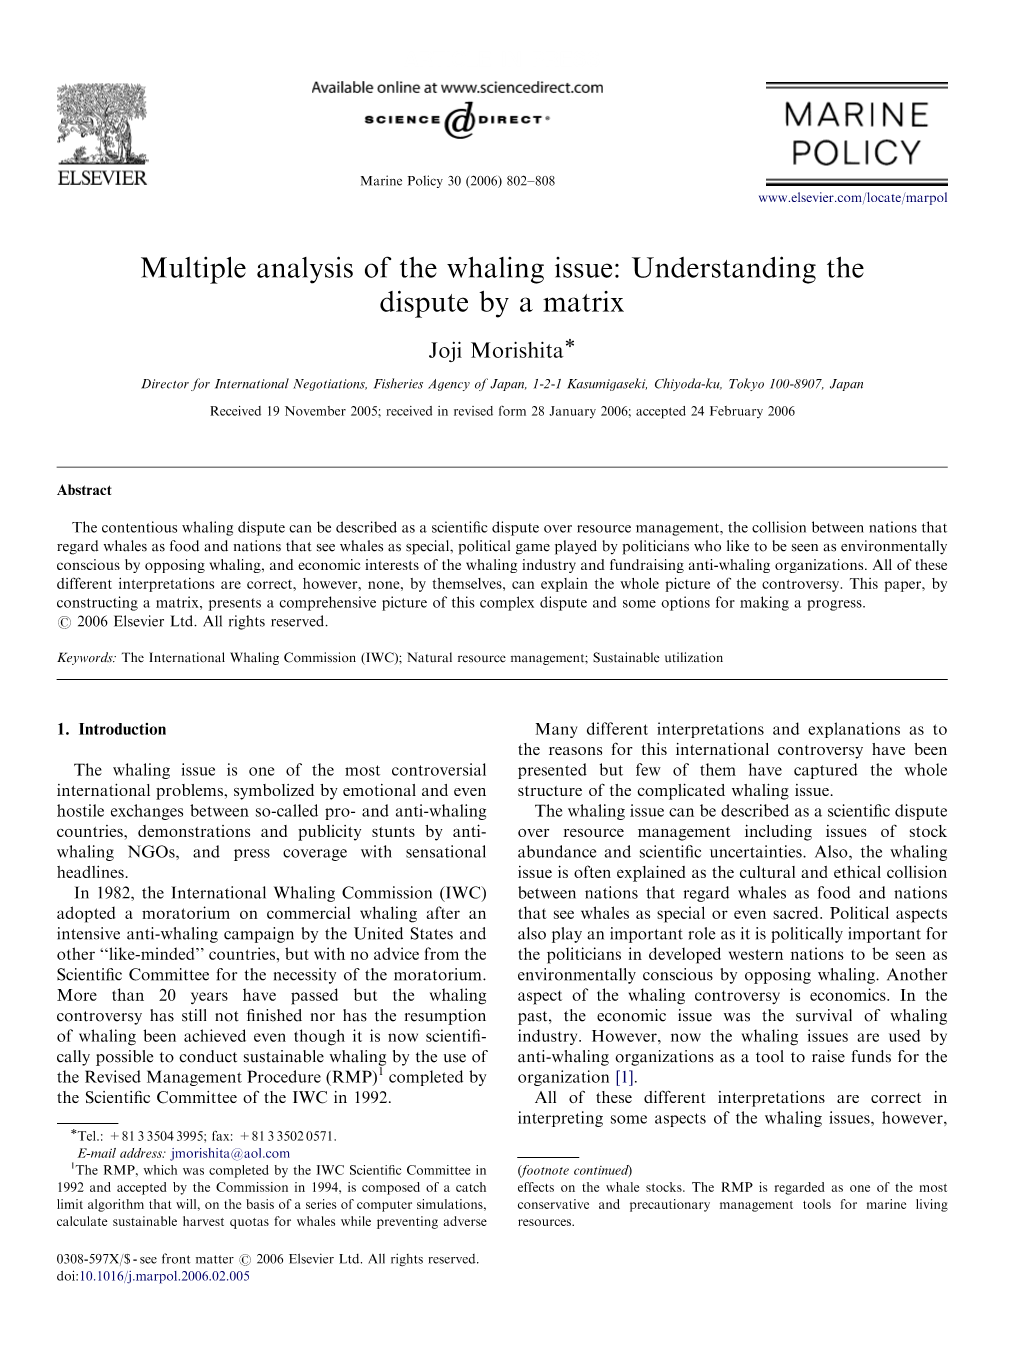 Multiple Analysis of the Whaling Issue: Understanding the Dispute by a Matrix